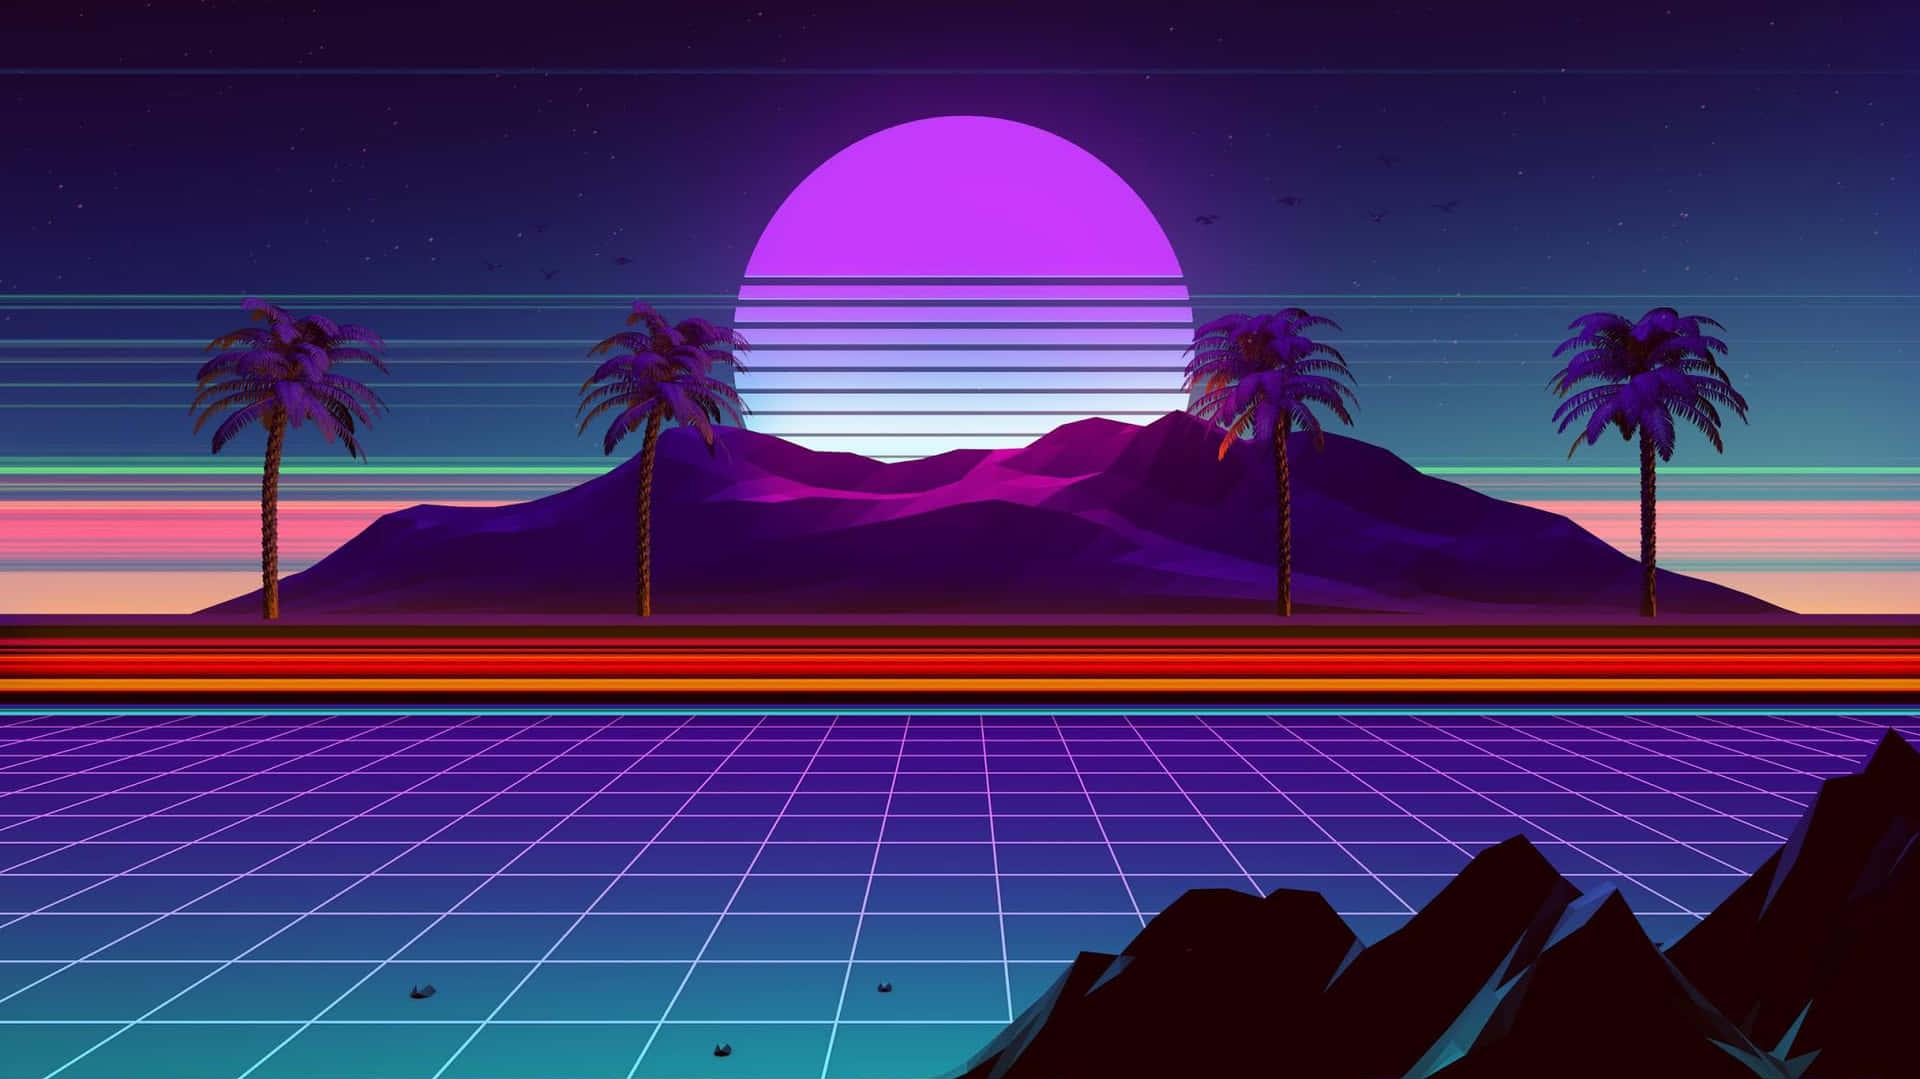 Download Take a moment to appreciate the endless beauty of a Retro